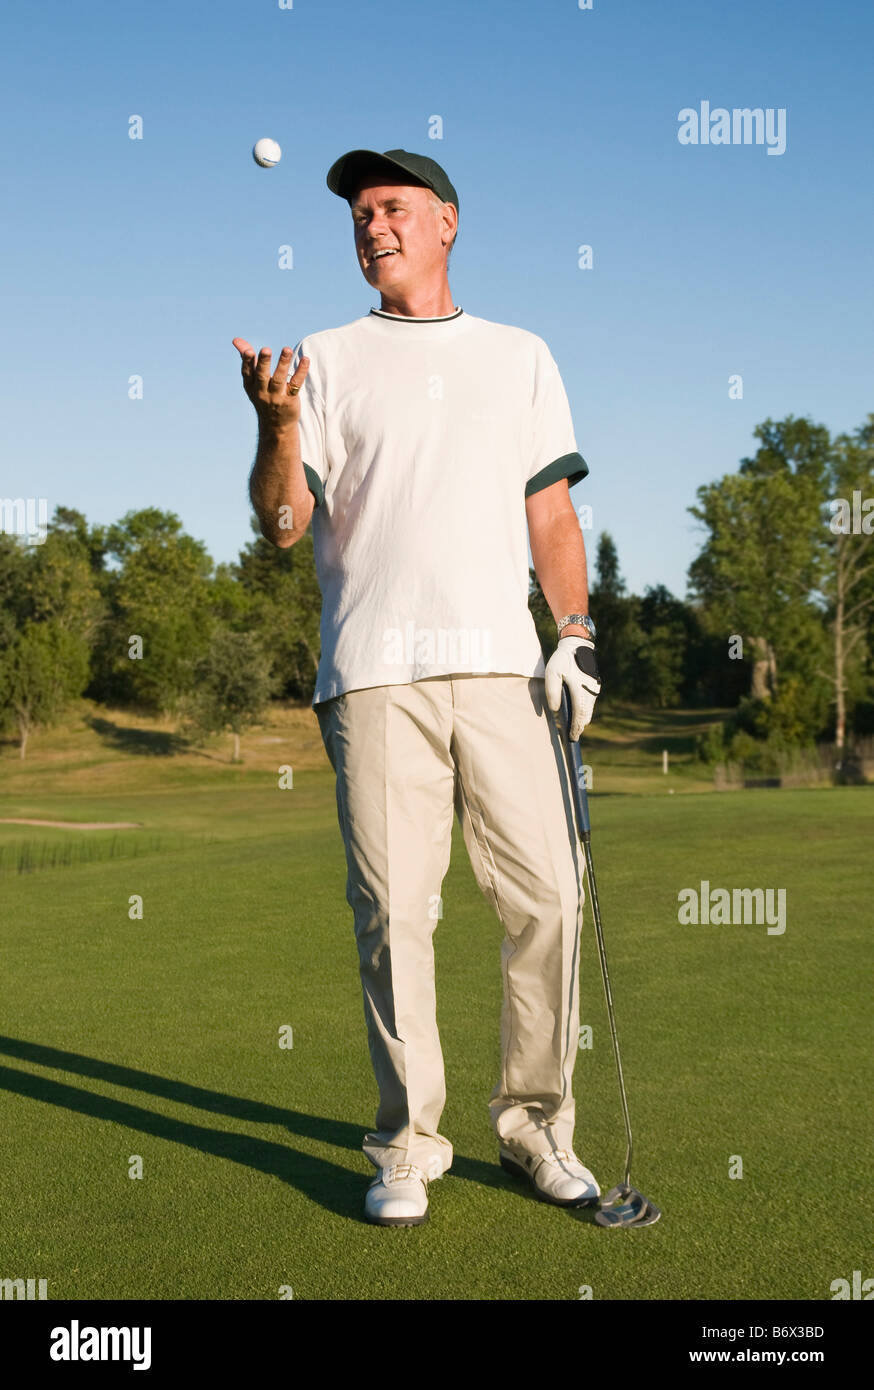 Man with golfball Stock Photo